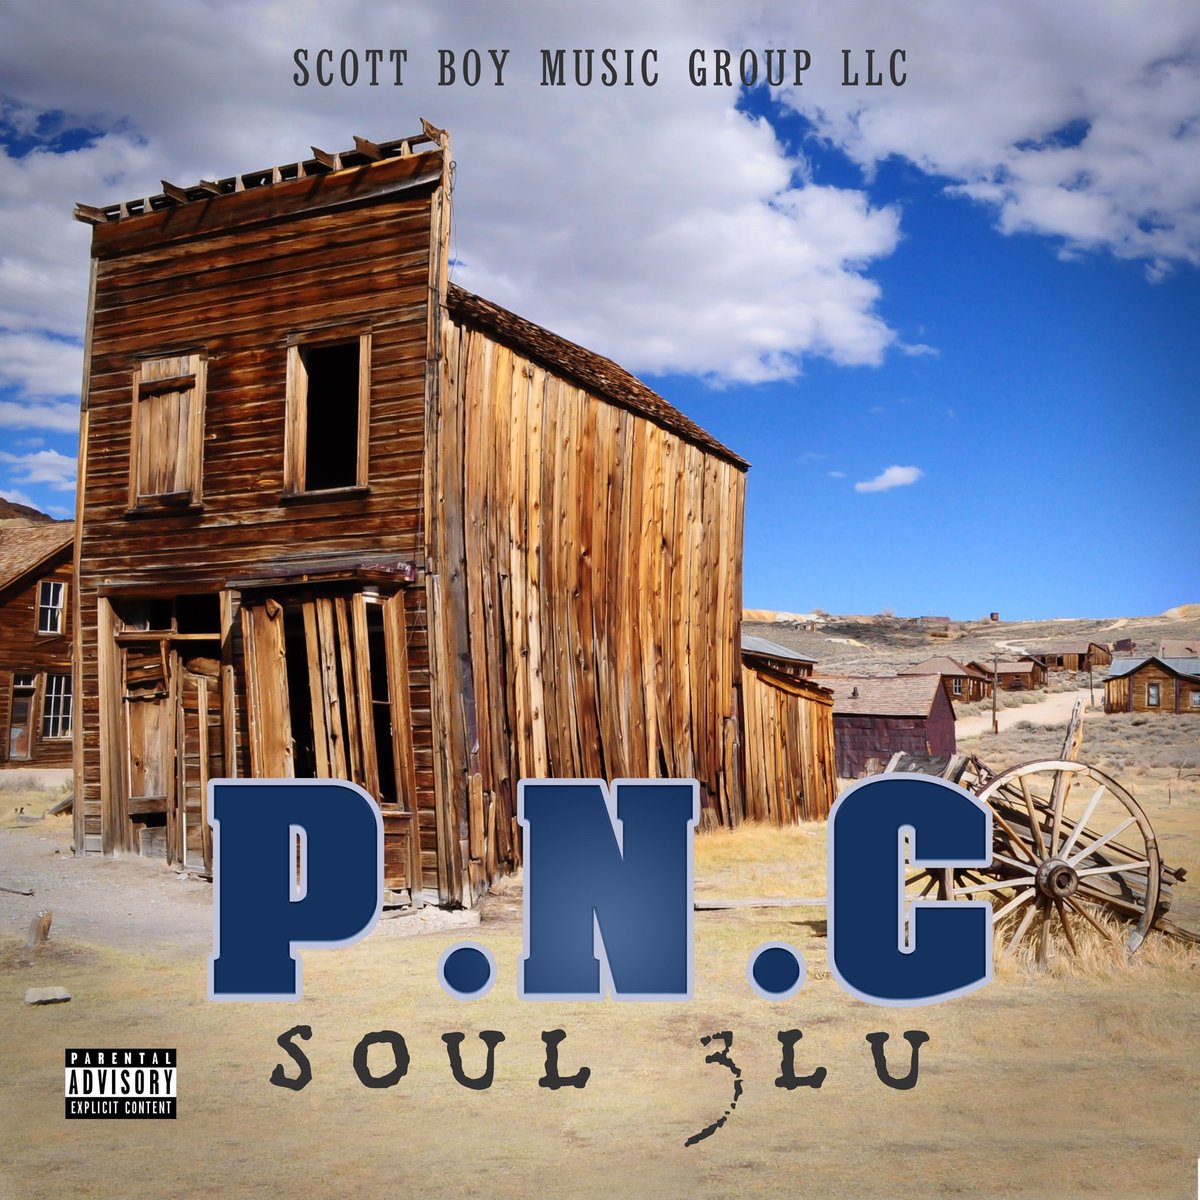 NEW SINGLE 'P.N.C.' BY @Soul3lu2 WILL BE AVAILABLE ON ALL STREAMING PLATFORMS 4/28/23 PRE-SAVE 🔗👇👇PRODUCED BY @lowkeiikidd
#scottboymusicpublishing #soul3lu #pnc
#NewSingle #newsong #rapmusic #rapper